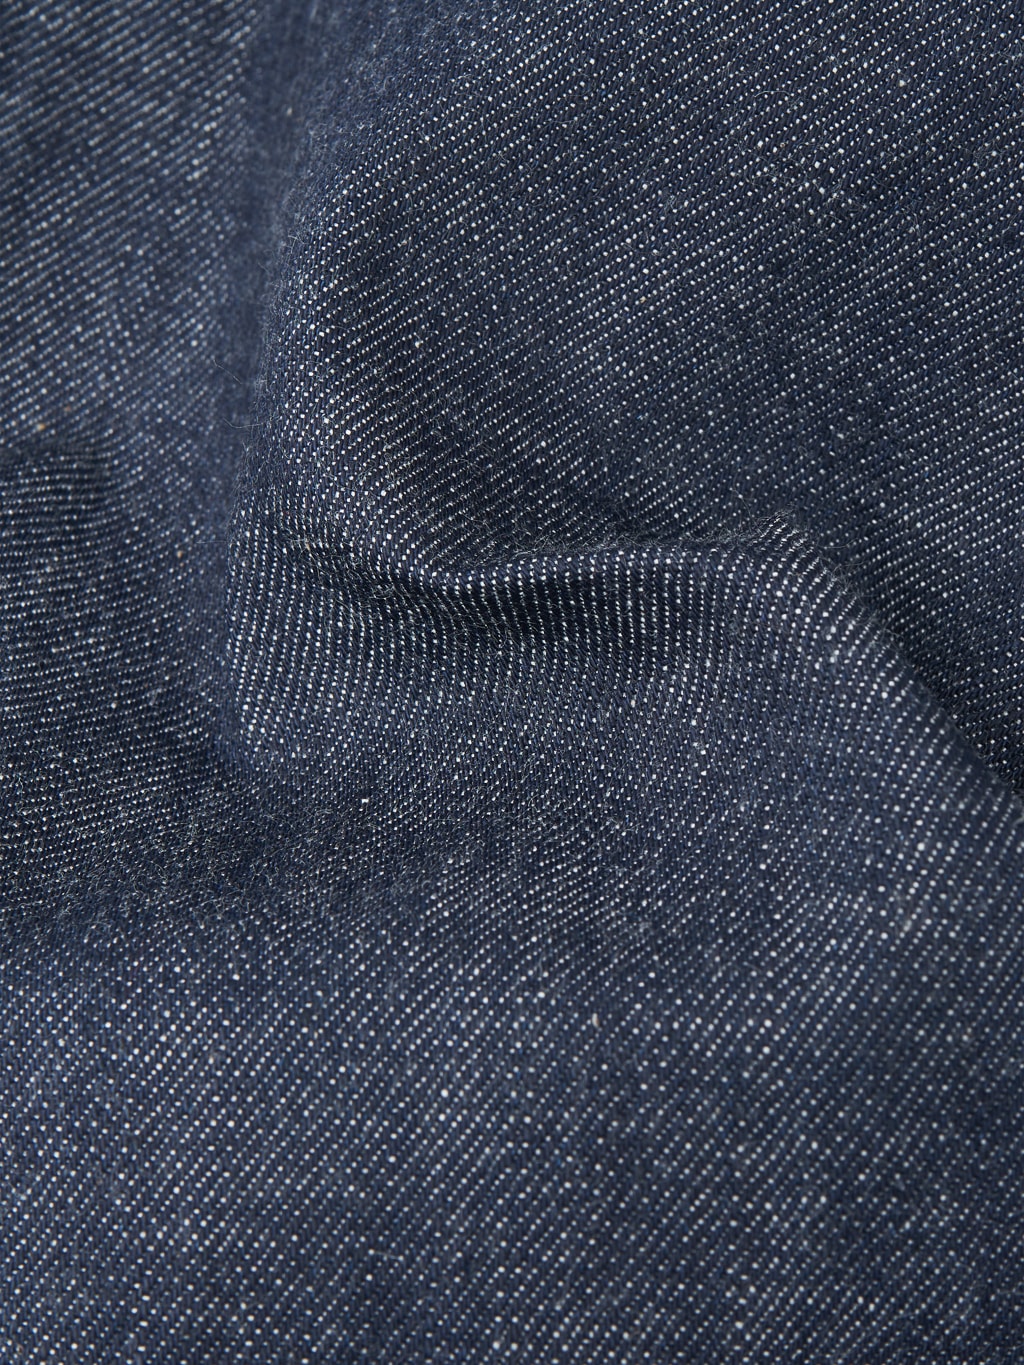 Momotaro legacy blue high tapered jeans denim fabric texture